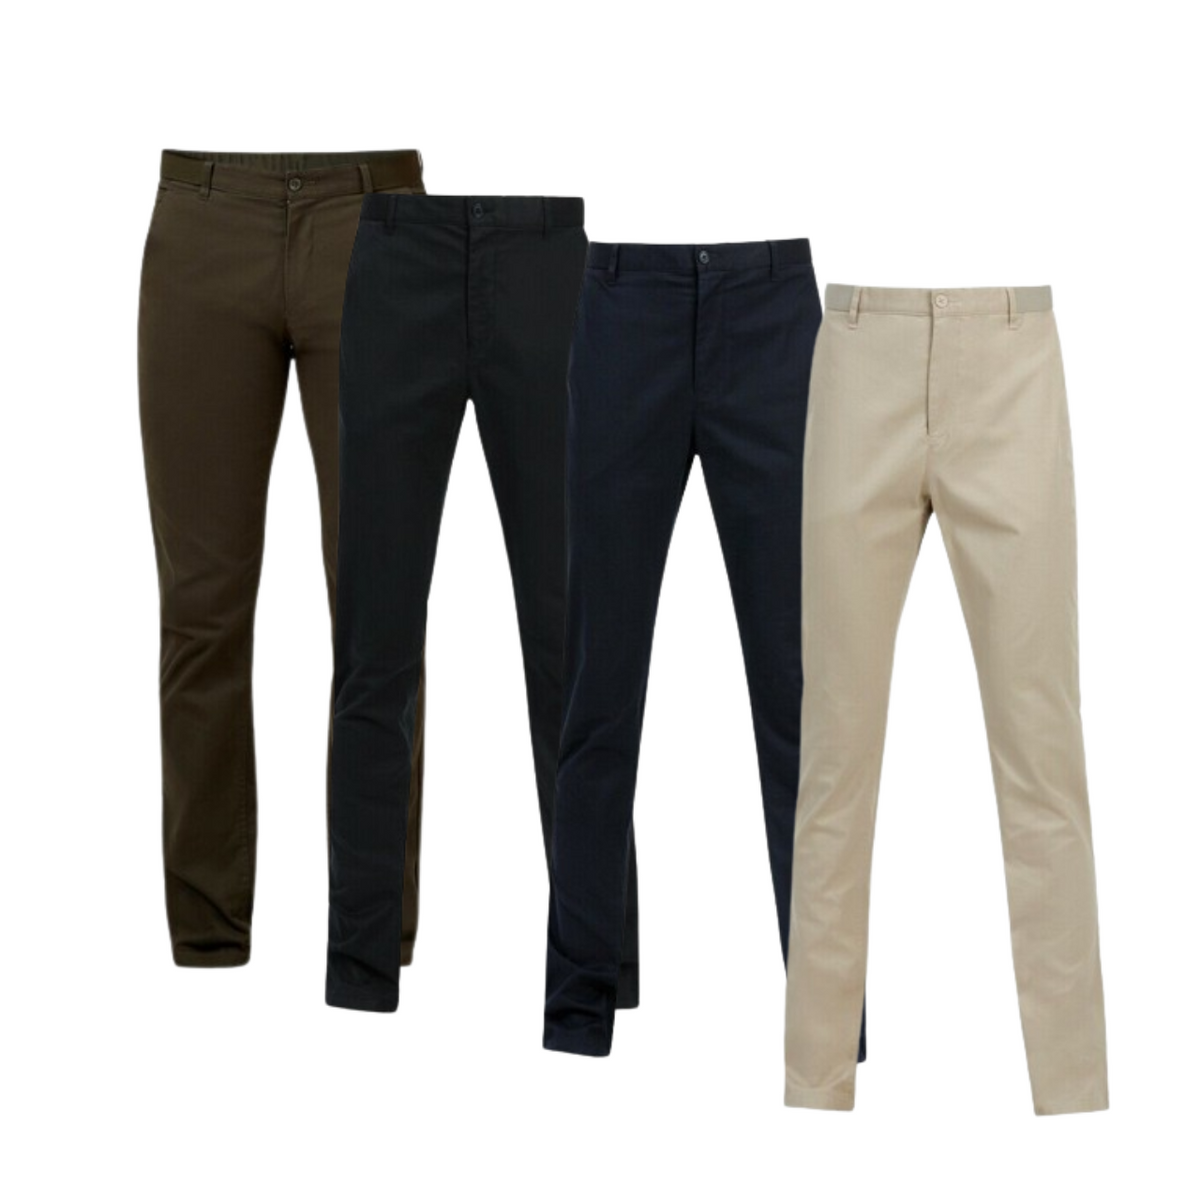 Mens NNT Uniforms Workwear Chino Pants Business Work Smart Casual Stretch CATCH6-Collins Clothing Co